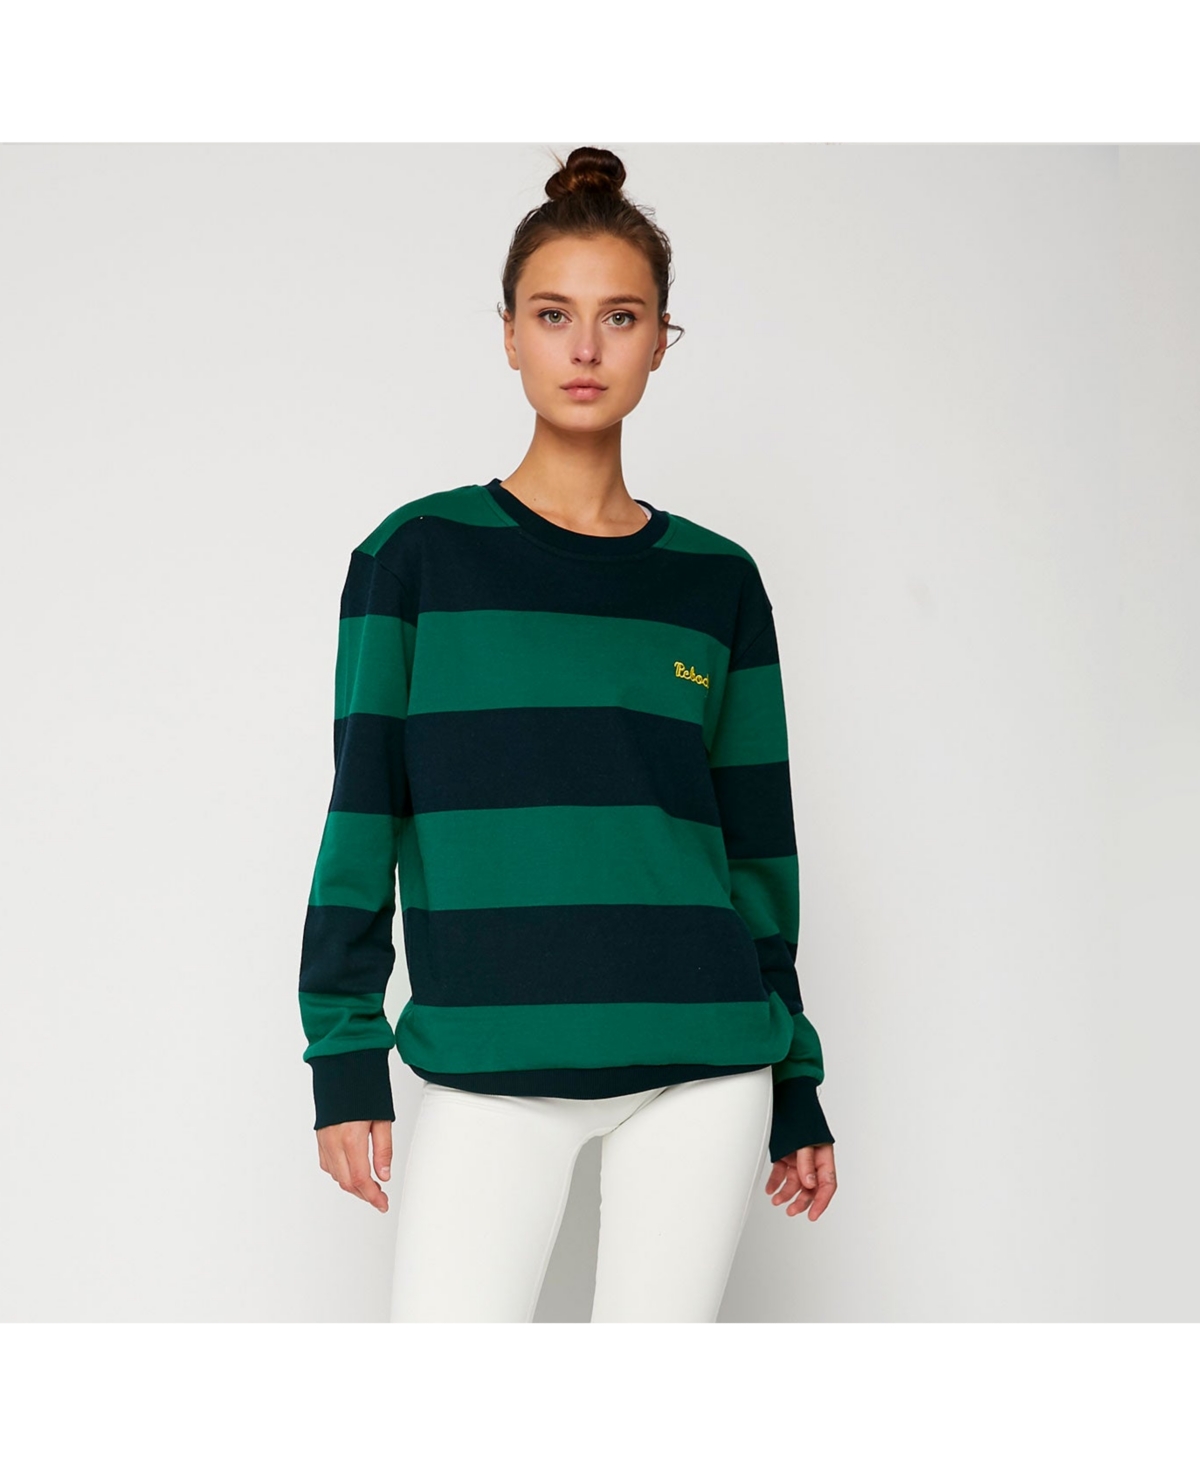  Embroidered Rebody Rugby Striped Sweatshirt *Sustainable for Women